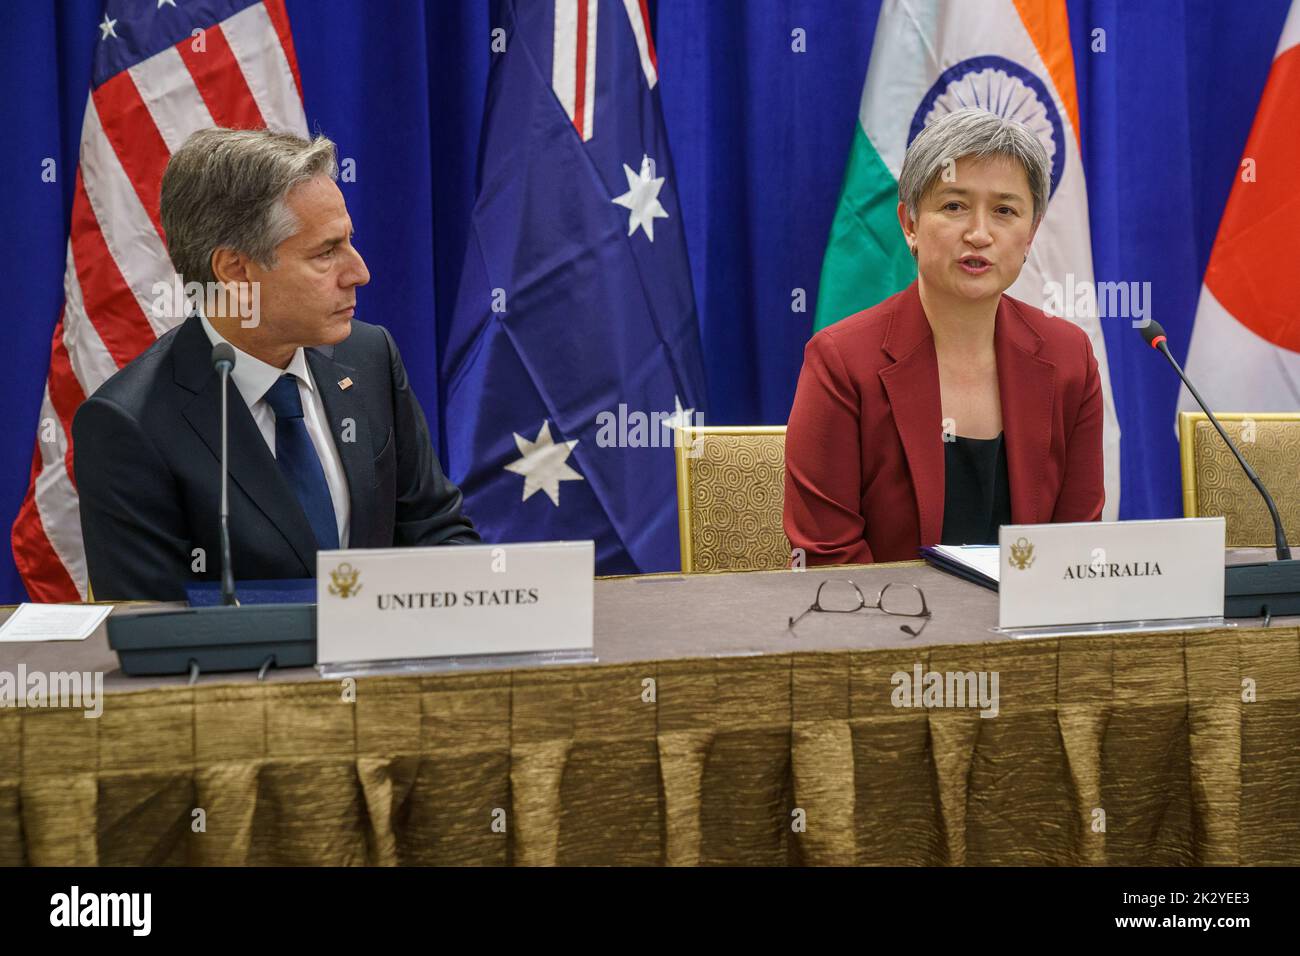 New York City, USA. 23rd Sep, 2022. U.S. Secretary of State Tony Blinken, left, looks on as Australian Foreign Minister Penny Wong, right, remarks during the Indo-Pacific Quad Meeting on the sidelines of the 77th Session of the U.N General Assembly, September 23, 2022, in New York City. Credit: Ron Przysucha/State Department Photo/Alamy Live News Stock Photo